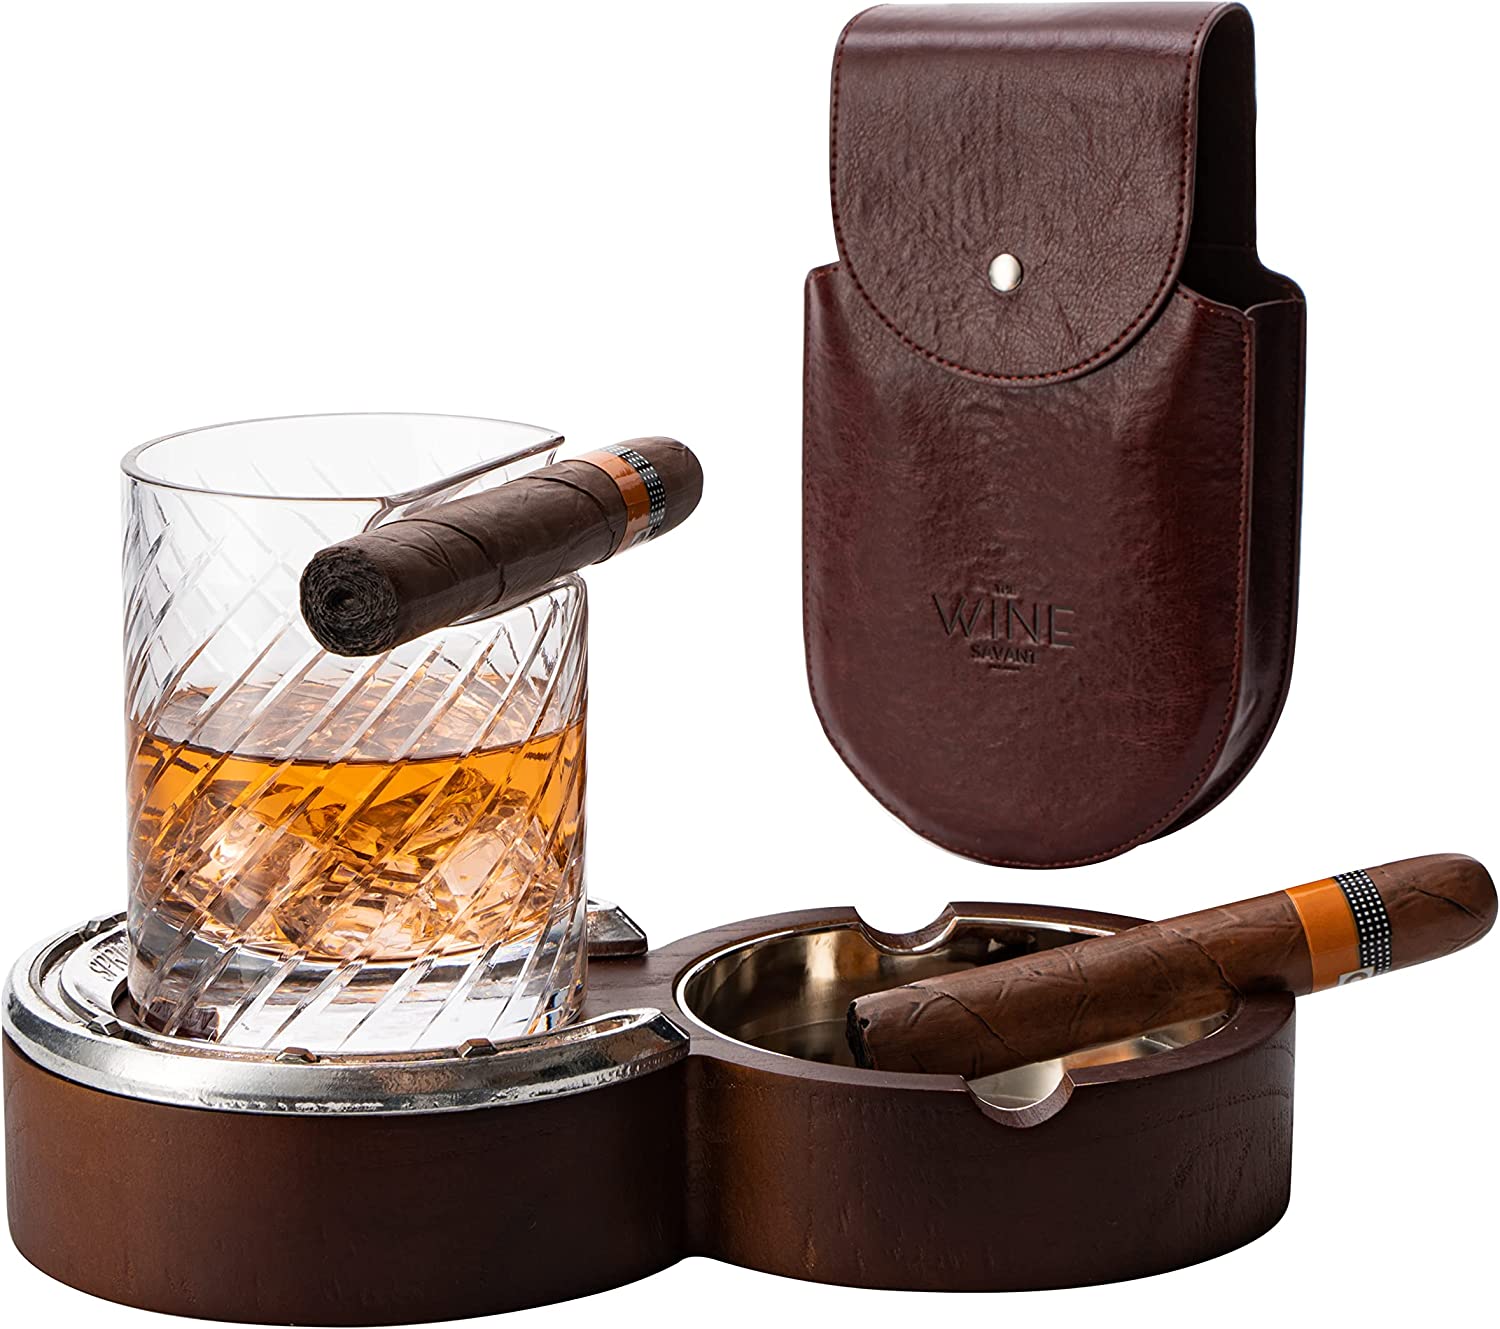 The Wine Savant Luxurious Cigar Glass - In A Leather Horseshoe Storage Case Whiskey Glassware with Cigar Holder - 10oz Cigar Holder Whiskey, Ash Tray - Dad, Men Home Office, Leather Gifts-5